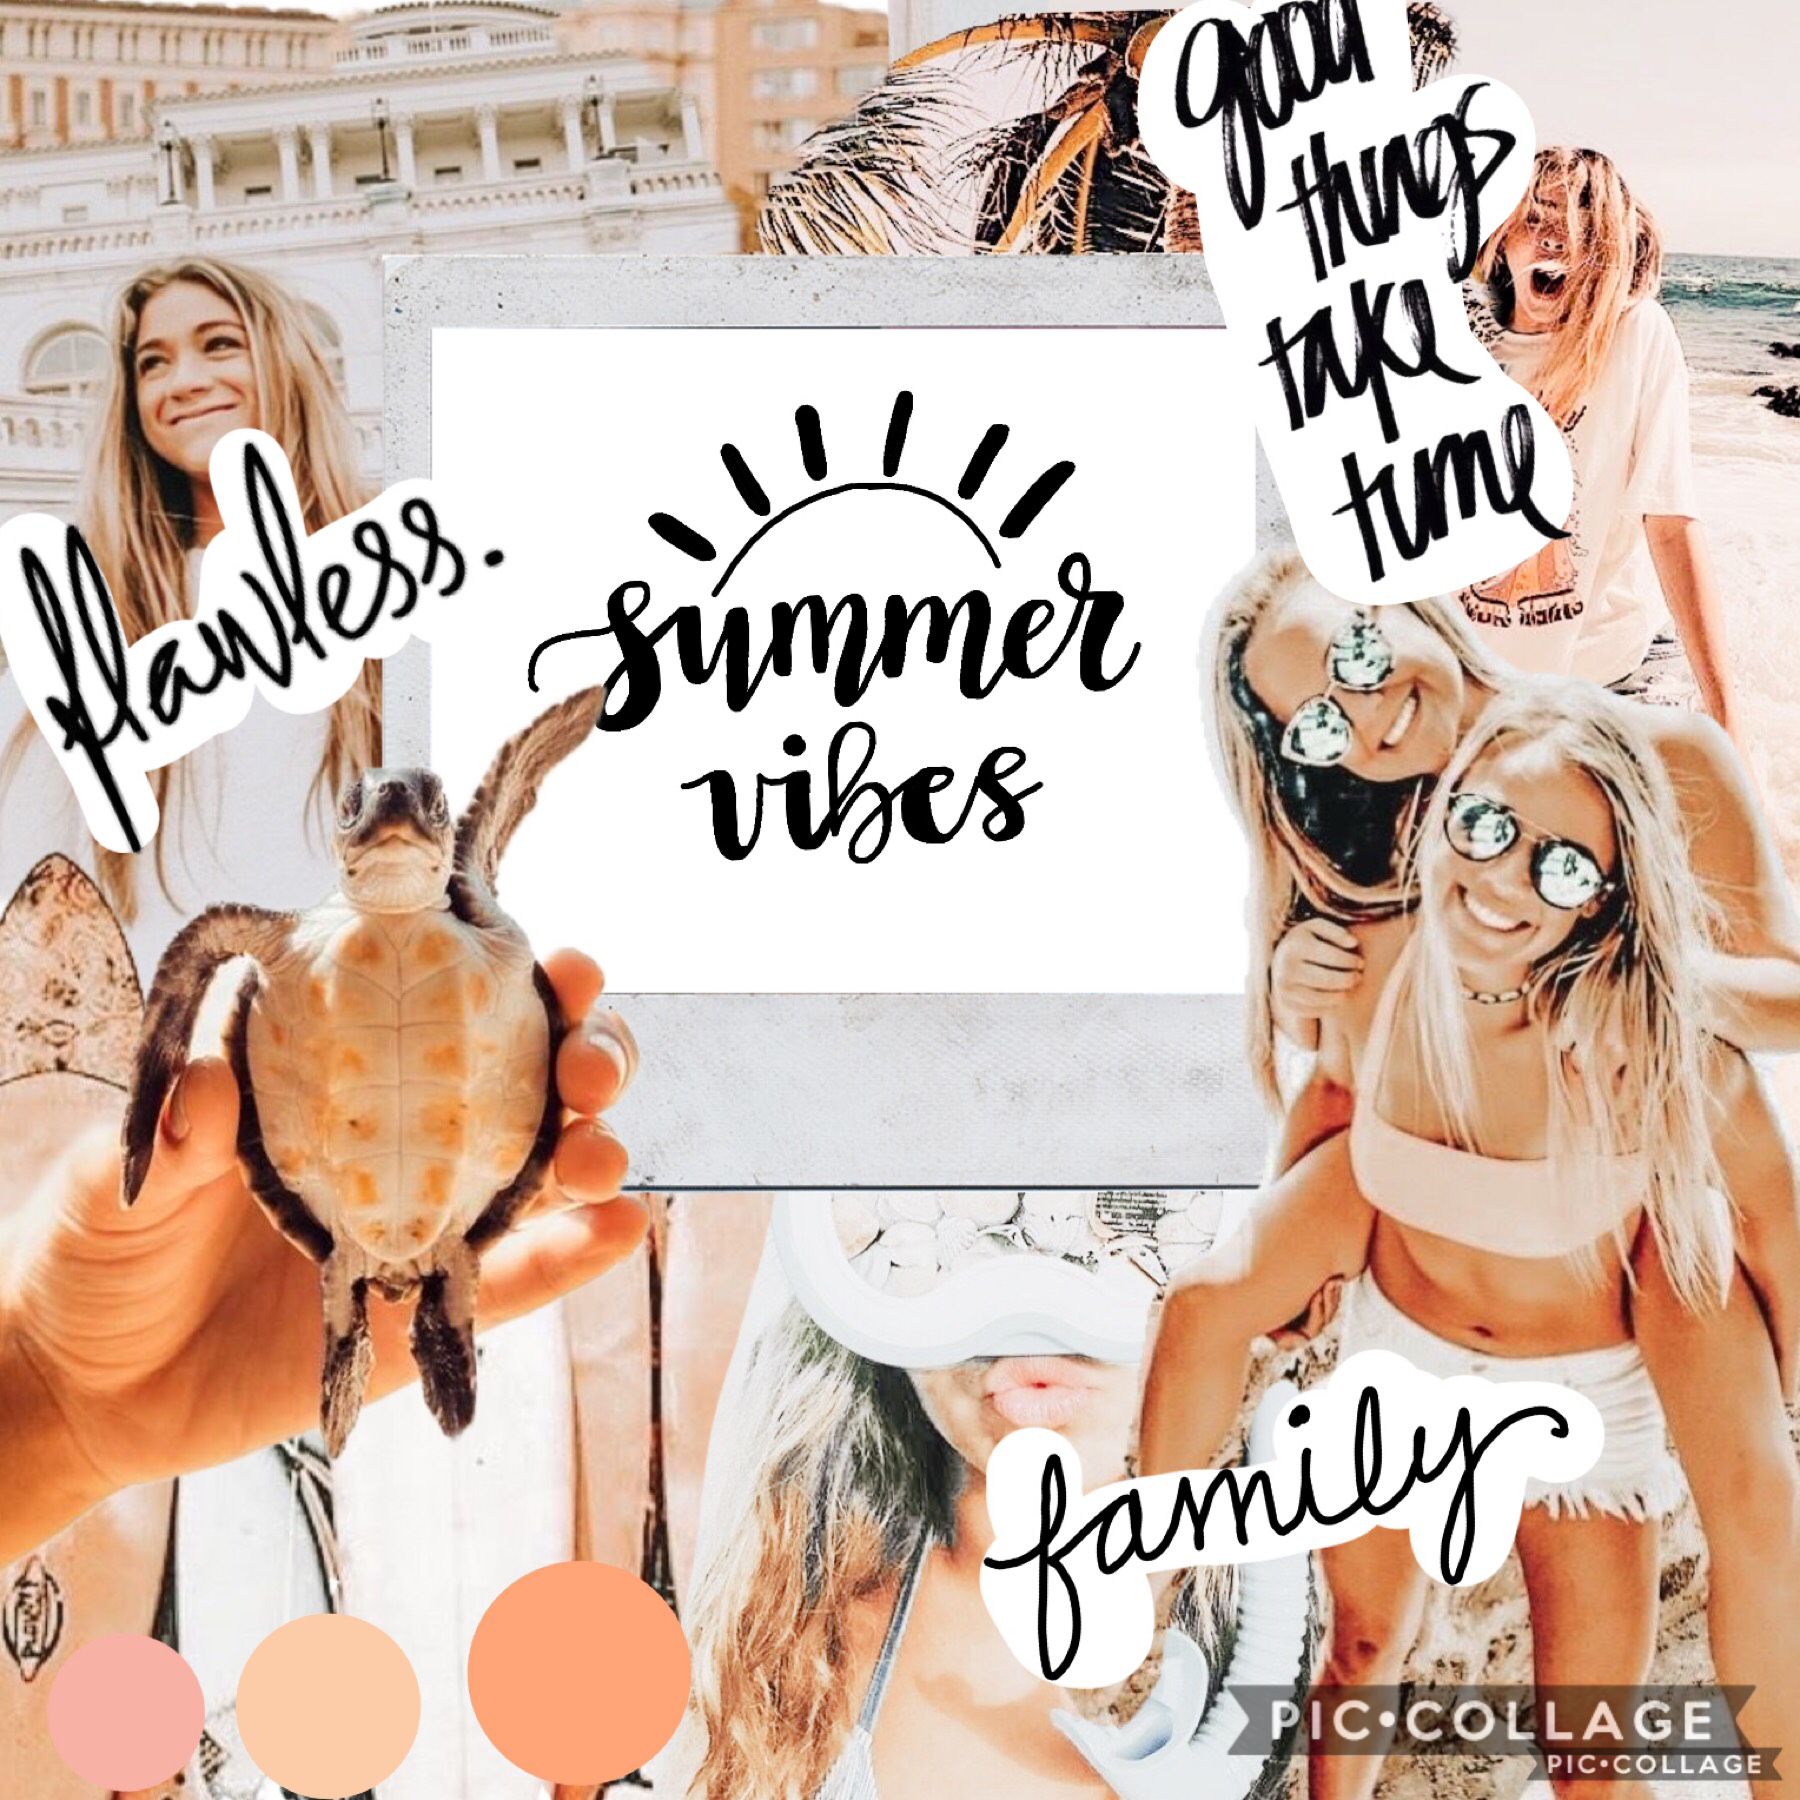 TAP

IT’S NOT SUMMER BUT...JUST FELT LIKE MAKING ONE..